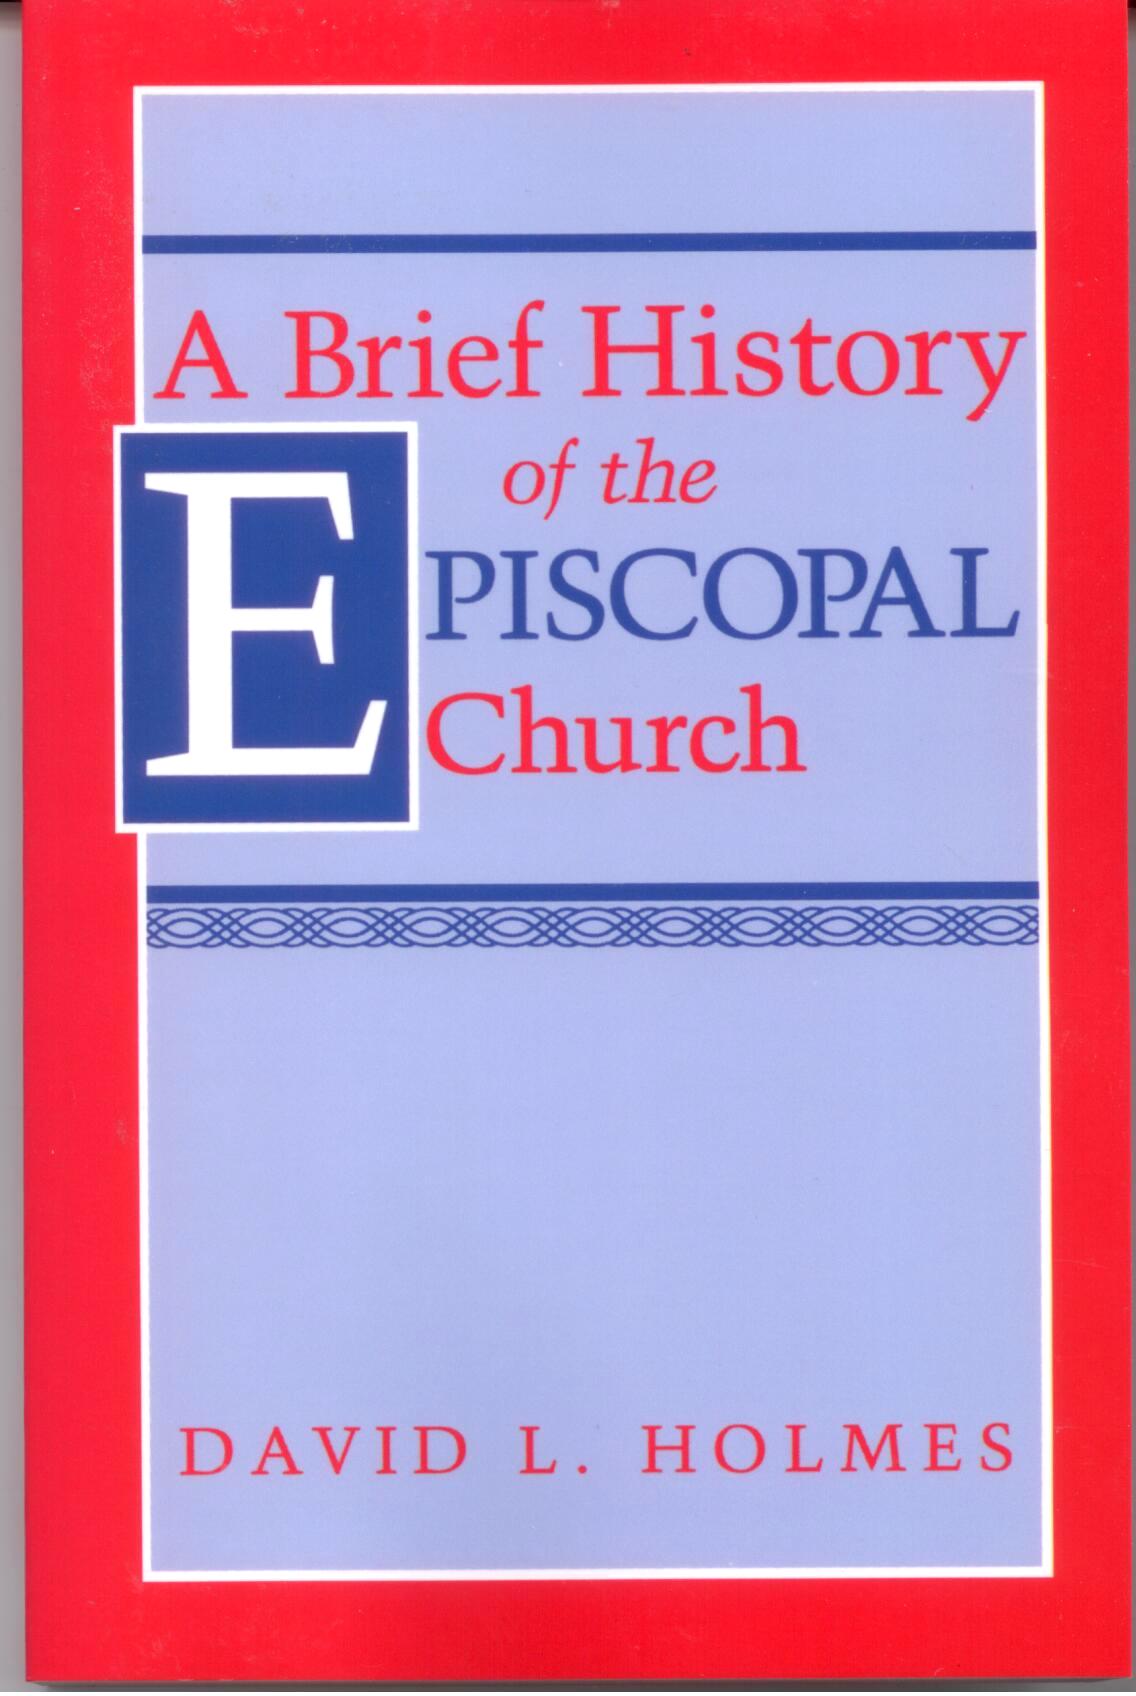 A Brief History of the Episcopal Church by David L. Holmes